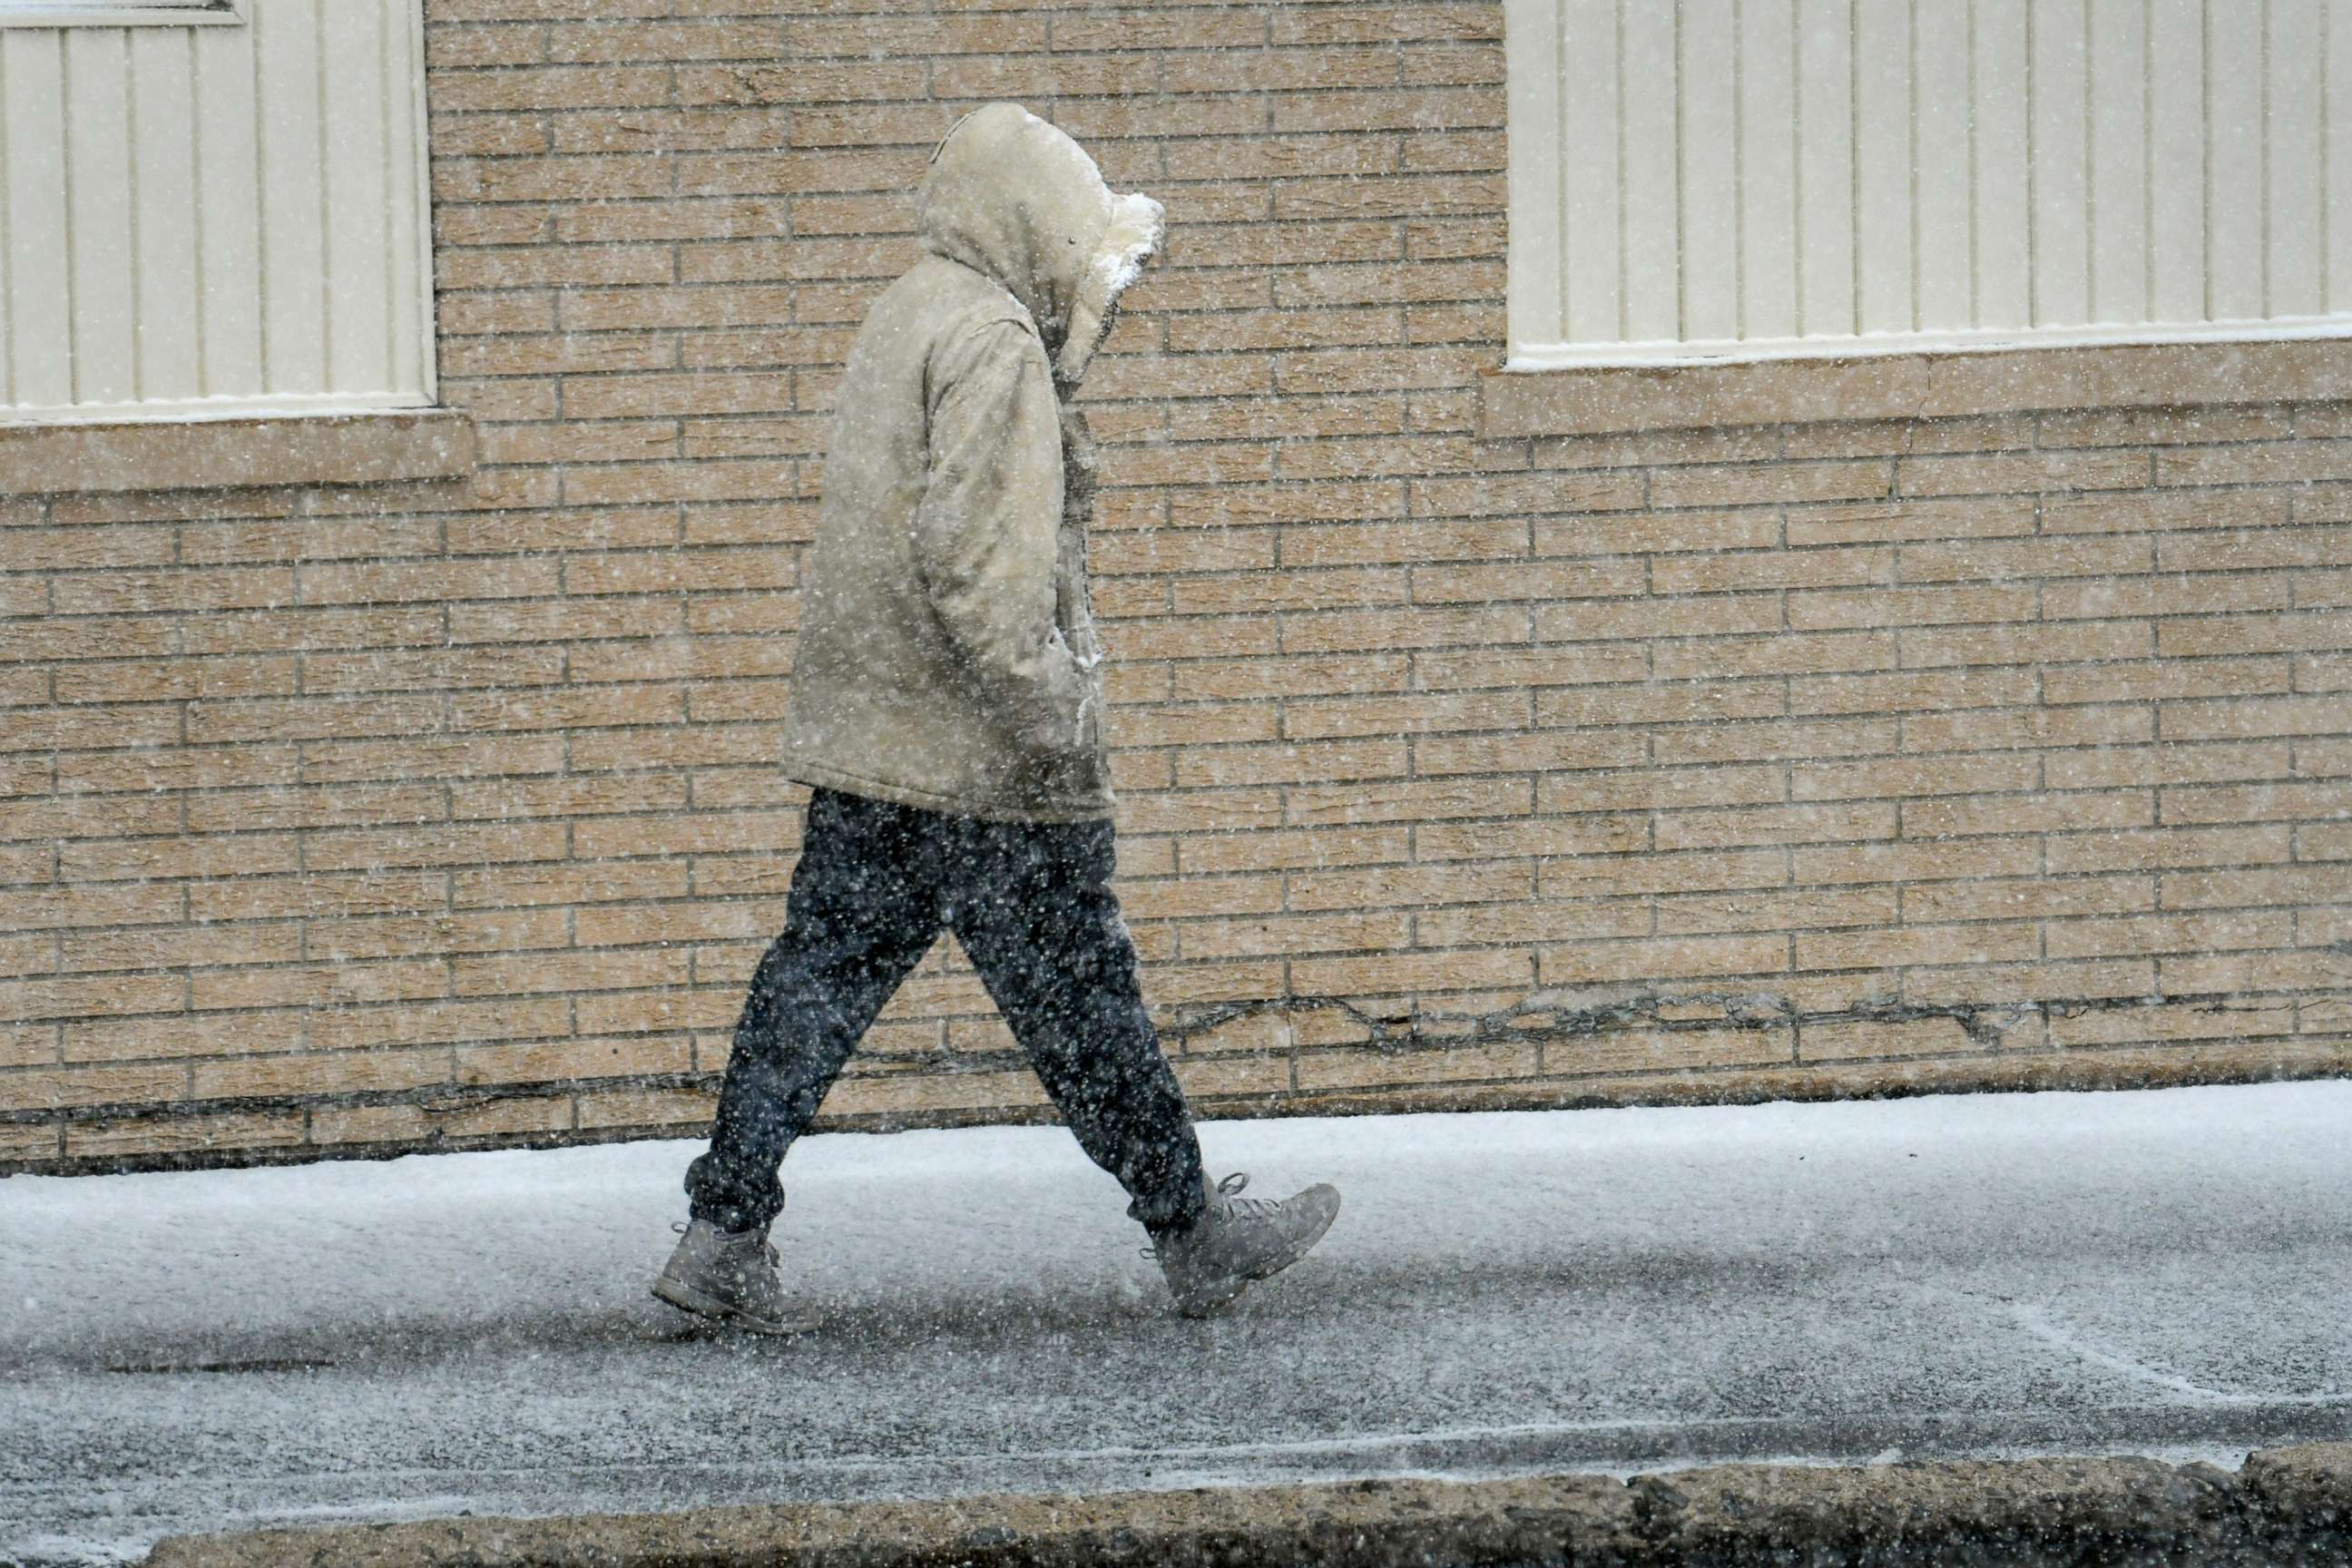 PHOTO: A person walks as snow falls in Frackville, Pa., on Easter Sunday, April 17, 2022.